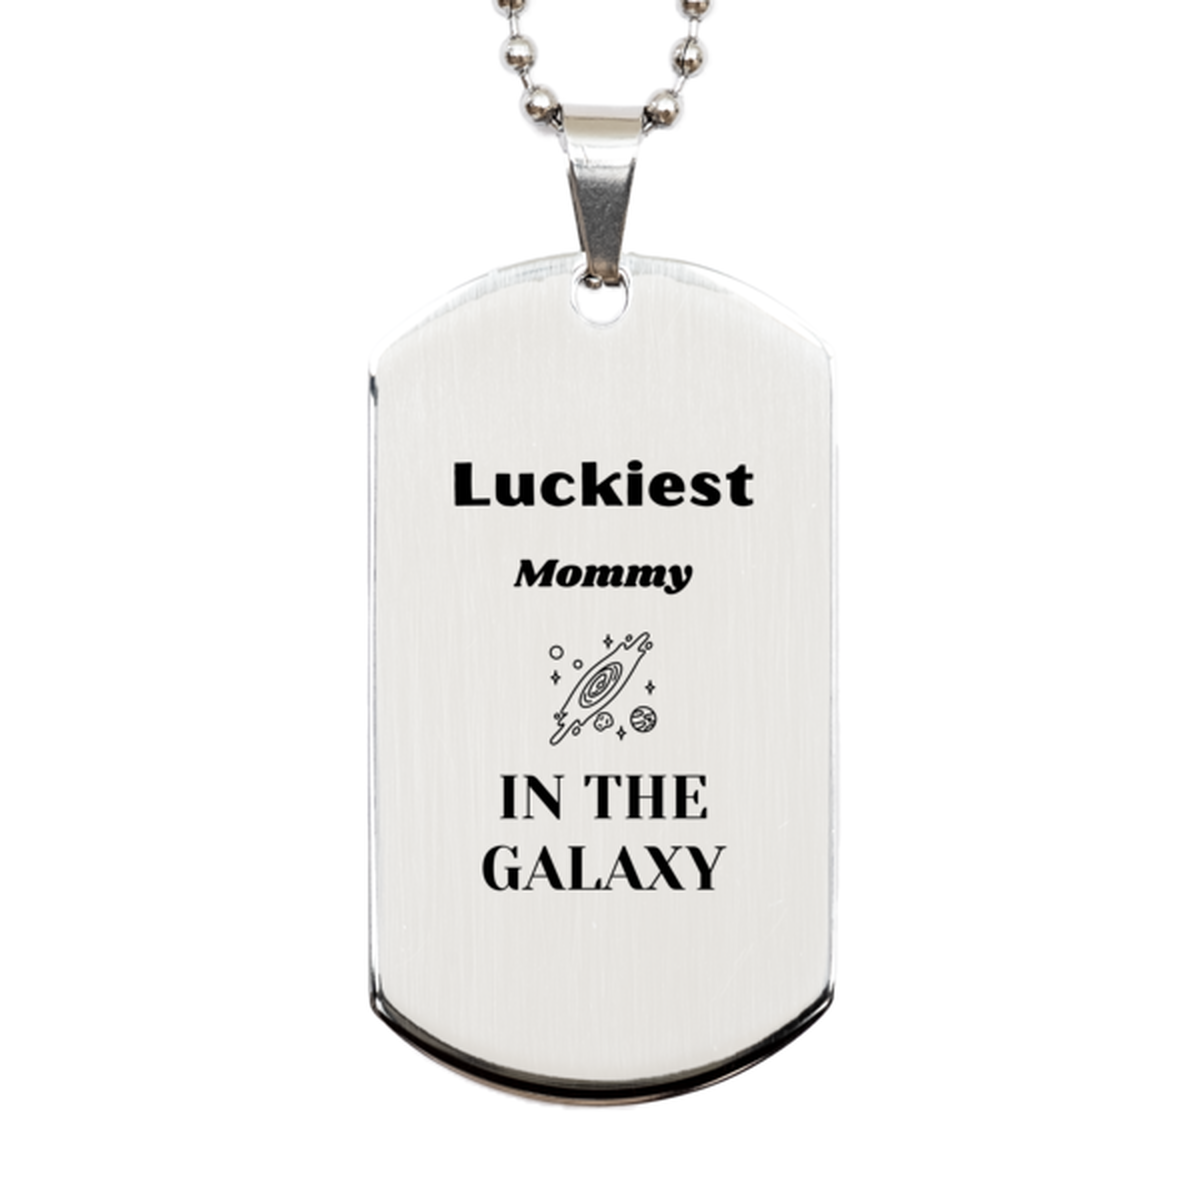 Luckiest Mommy in the Galaxy, To My Mommy Engraved Gifts, Christmas Mommy Silver Dog Tag Gifts, X-mas Birthday Unique Gifts For Mommy Men Women